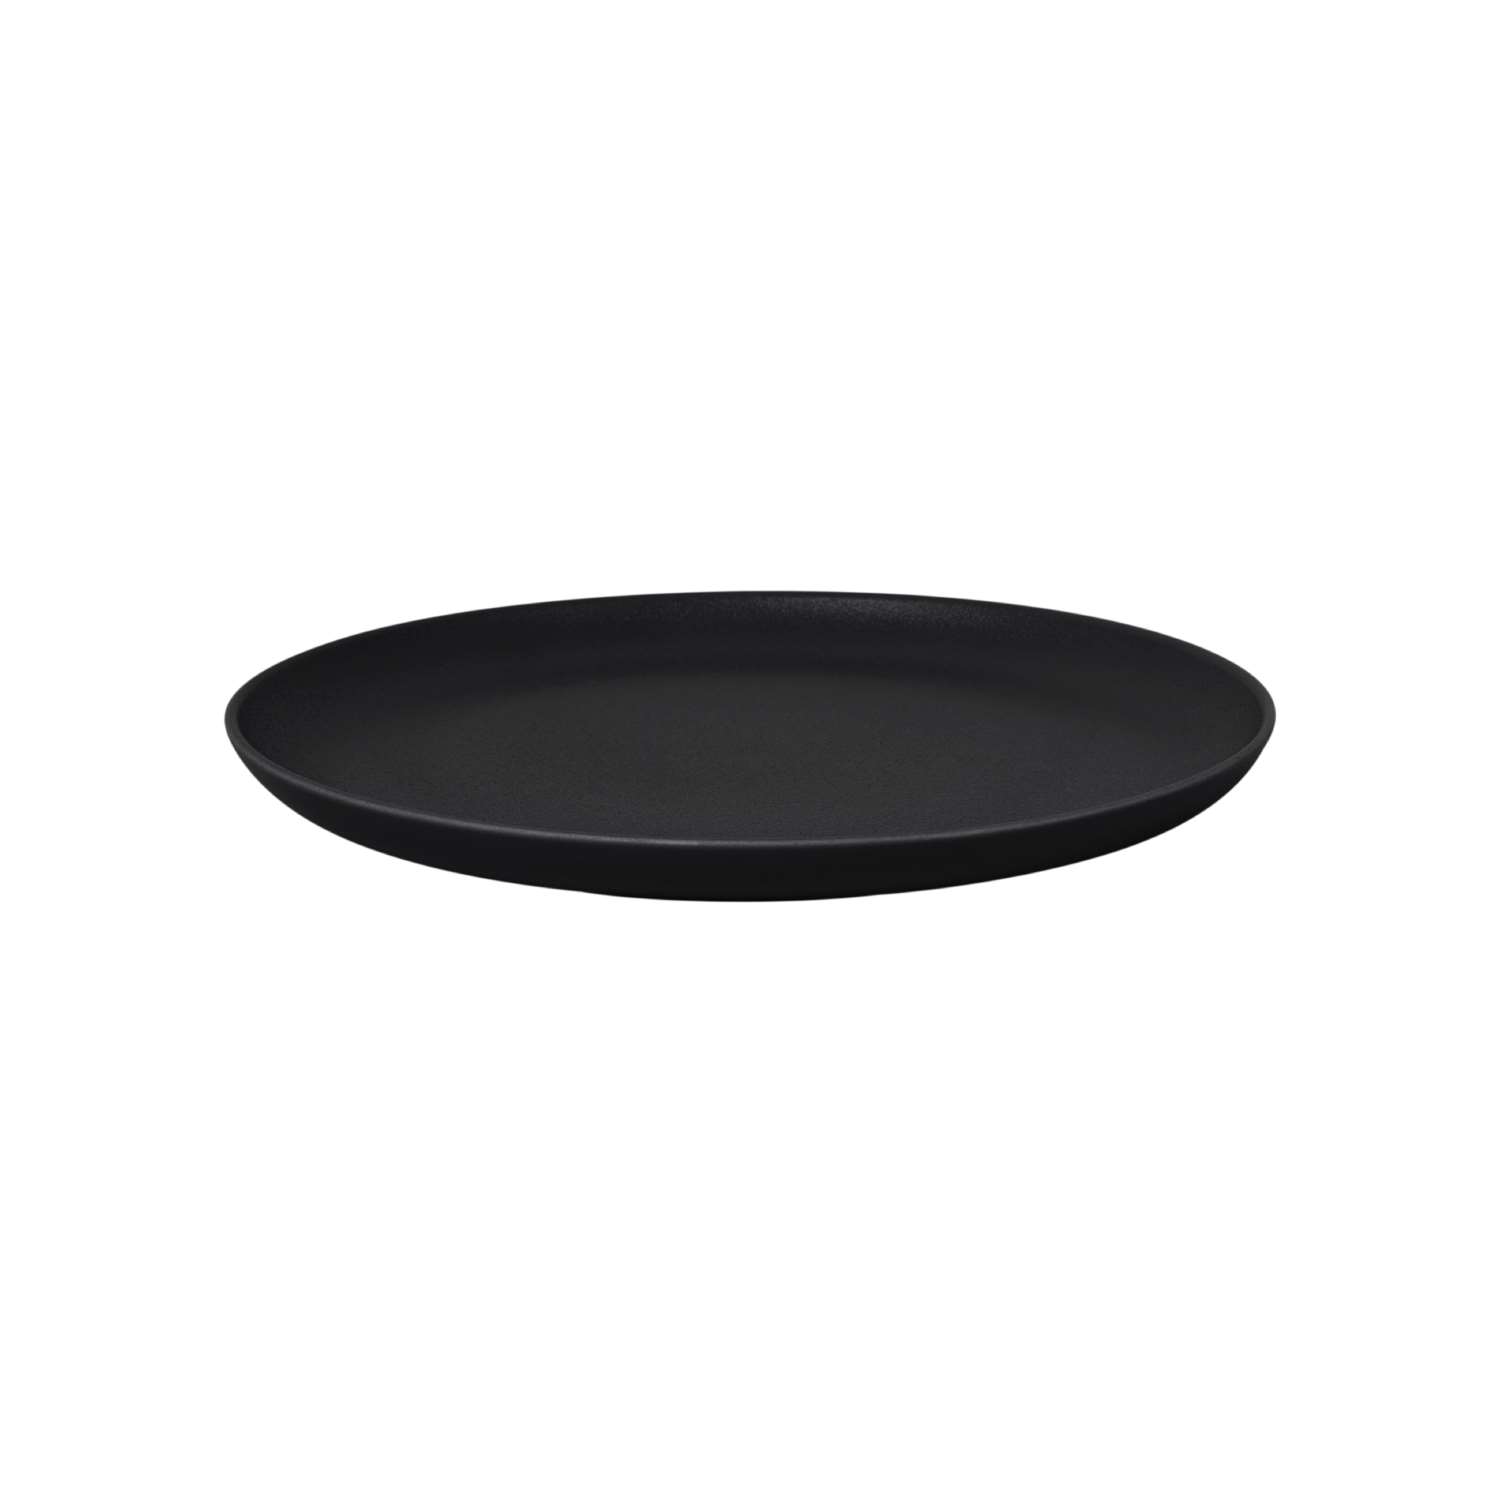 Baralee Black Sand Coupe Plate 30 Cm